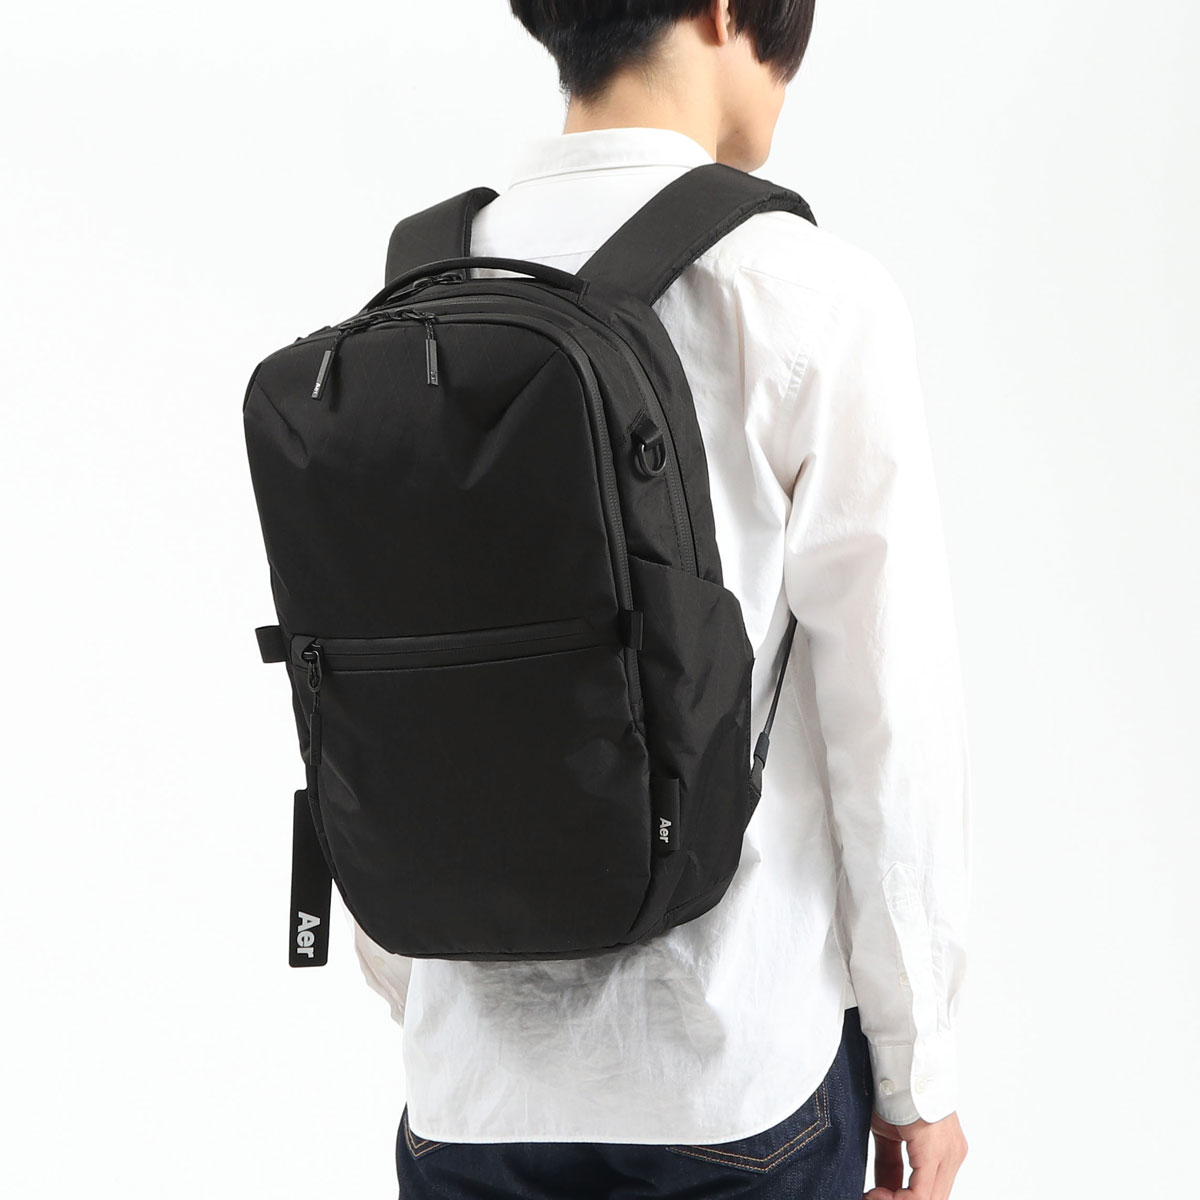 Aer エアー City Collection City Pack X-pac バックパック 14L ...